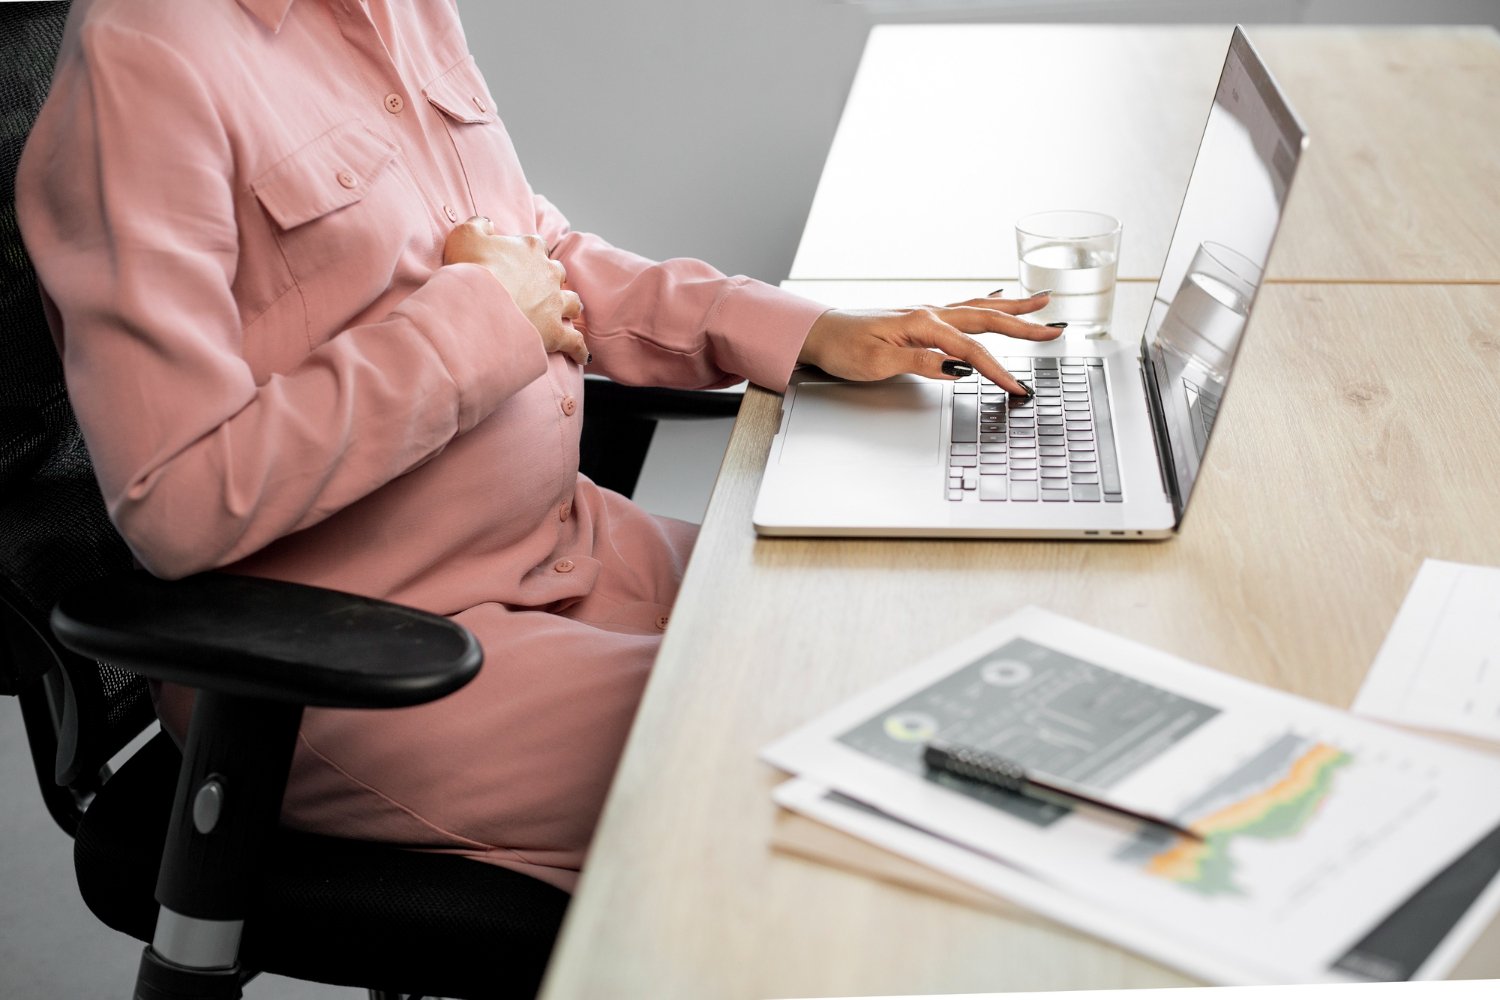 Balancing Work and Pregnancy: Tips for a Healthy Journey